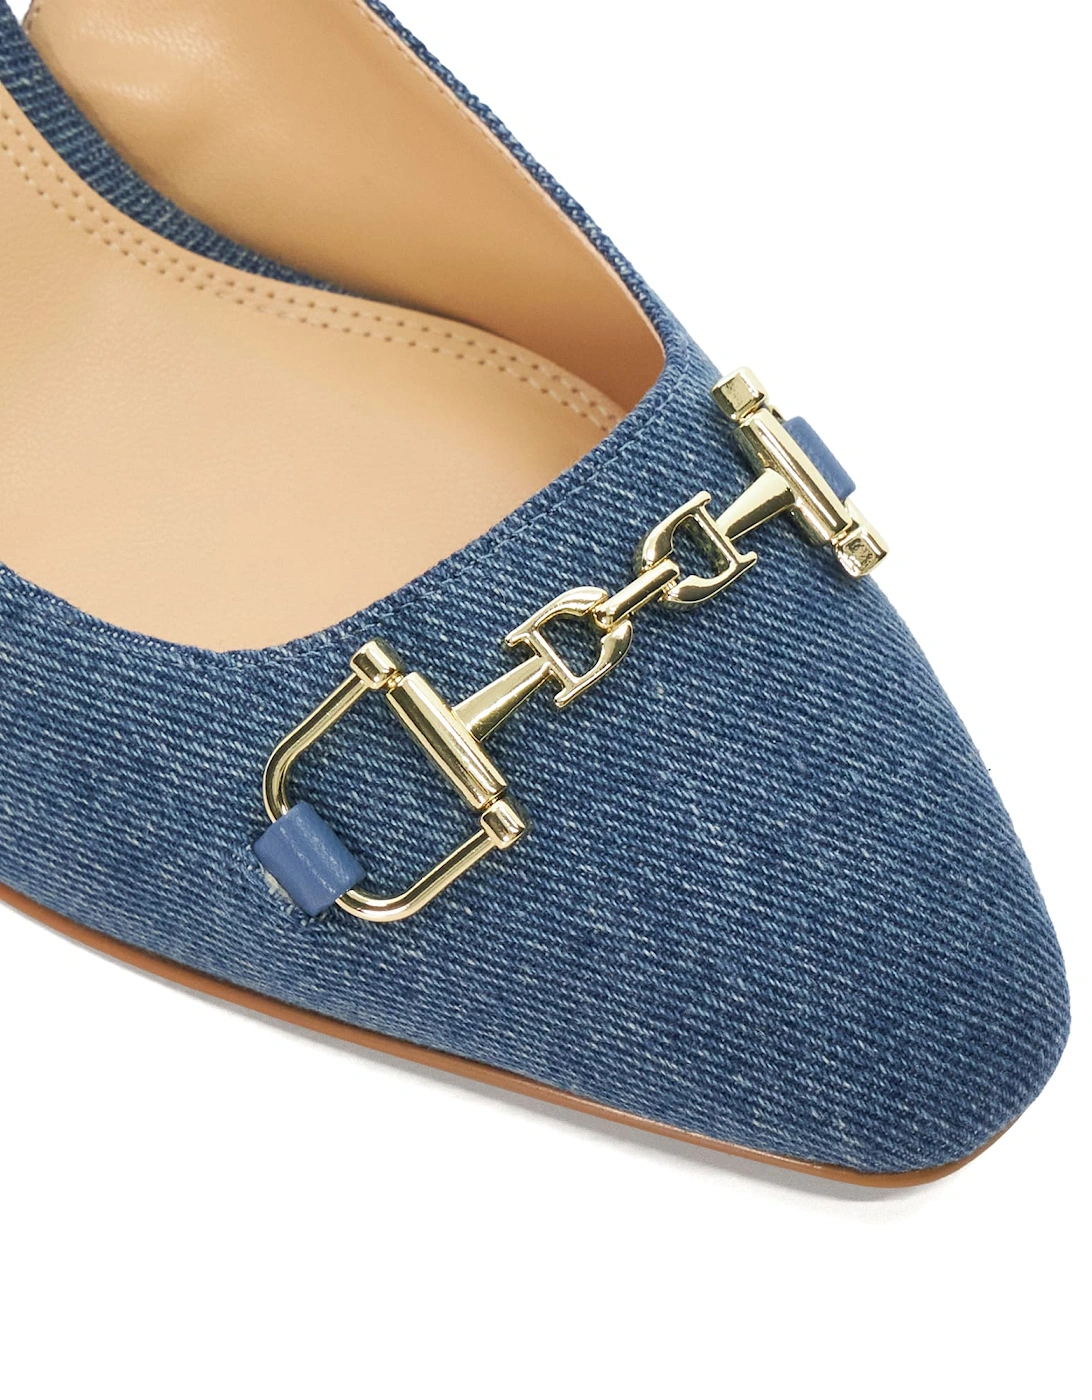 Ladies Choices - Brand Snaffle Block-Heeled Slingback Courts